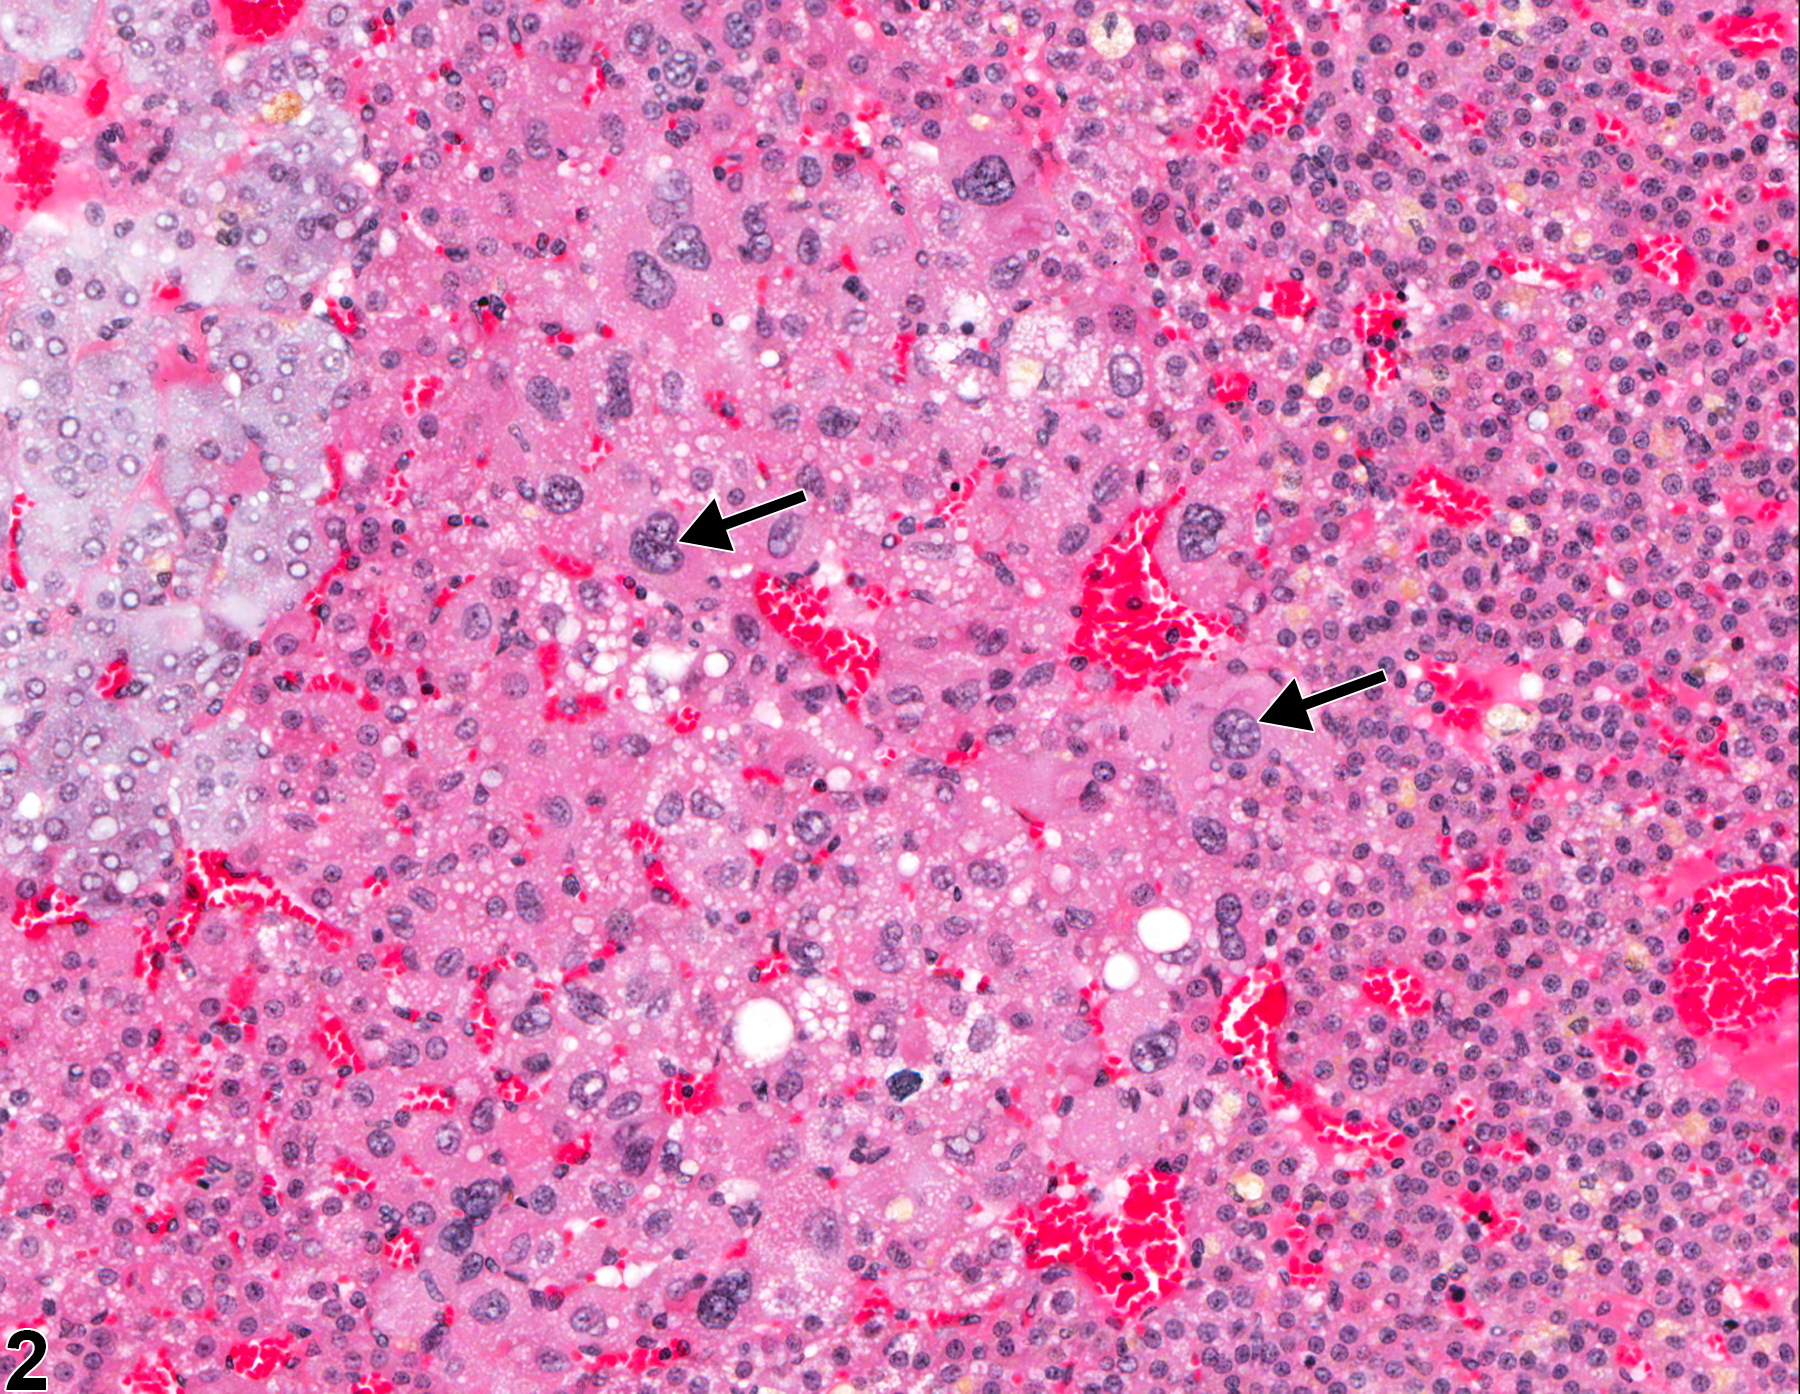 Image of cellular atypia in the adrenal gland cortex from a female F344/N rat in a chronic study